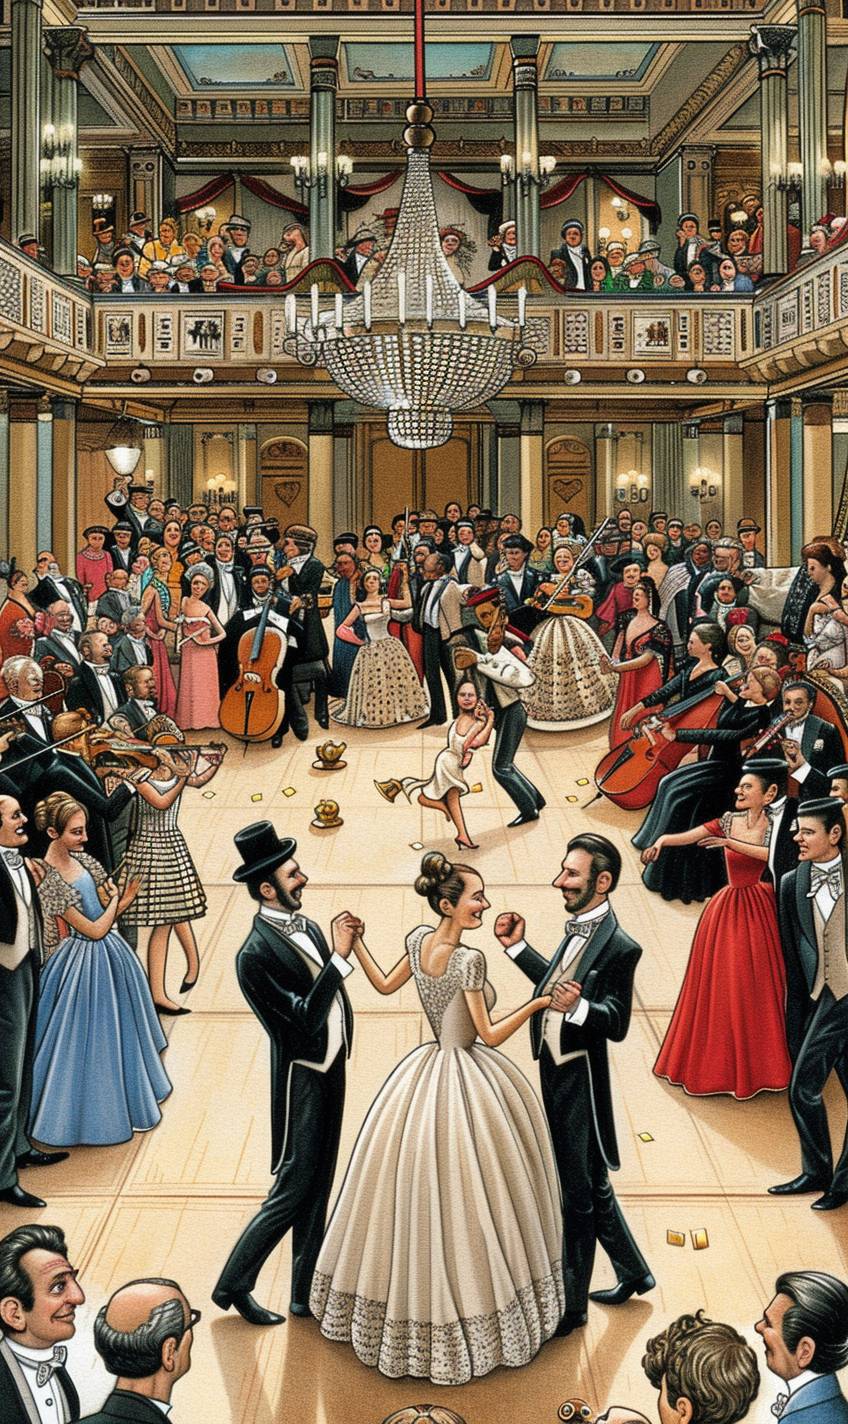 An elegant Victorian ballroom with chandeliers, couples dancing in elaborate costumes, live orchestra playing, opulent and grand setting